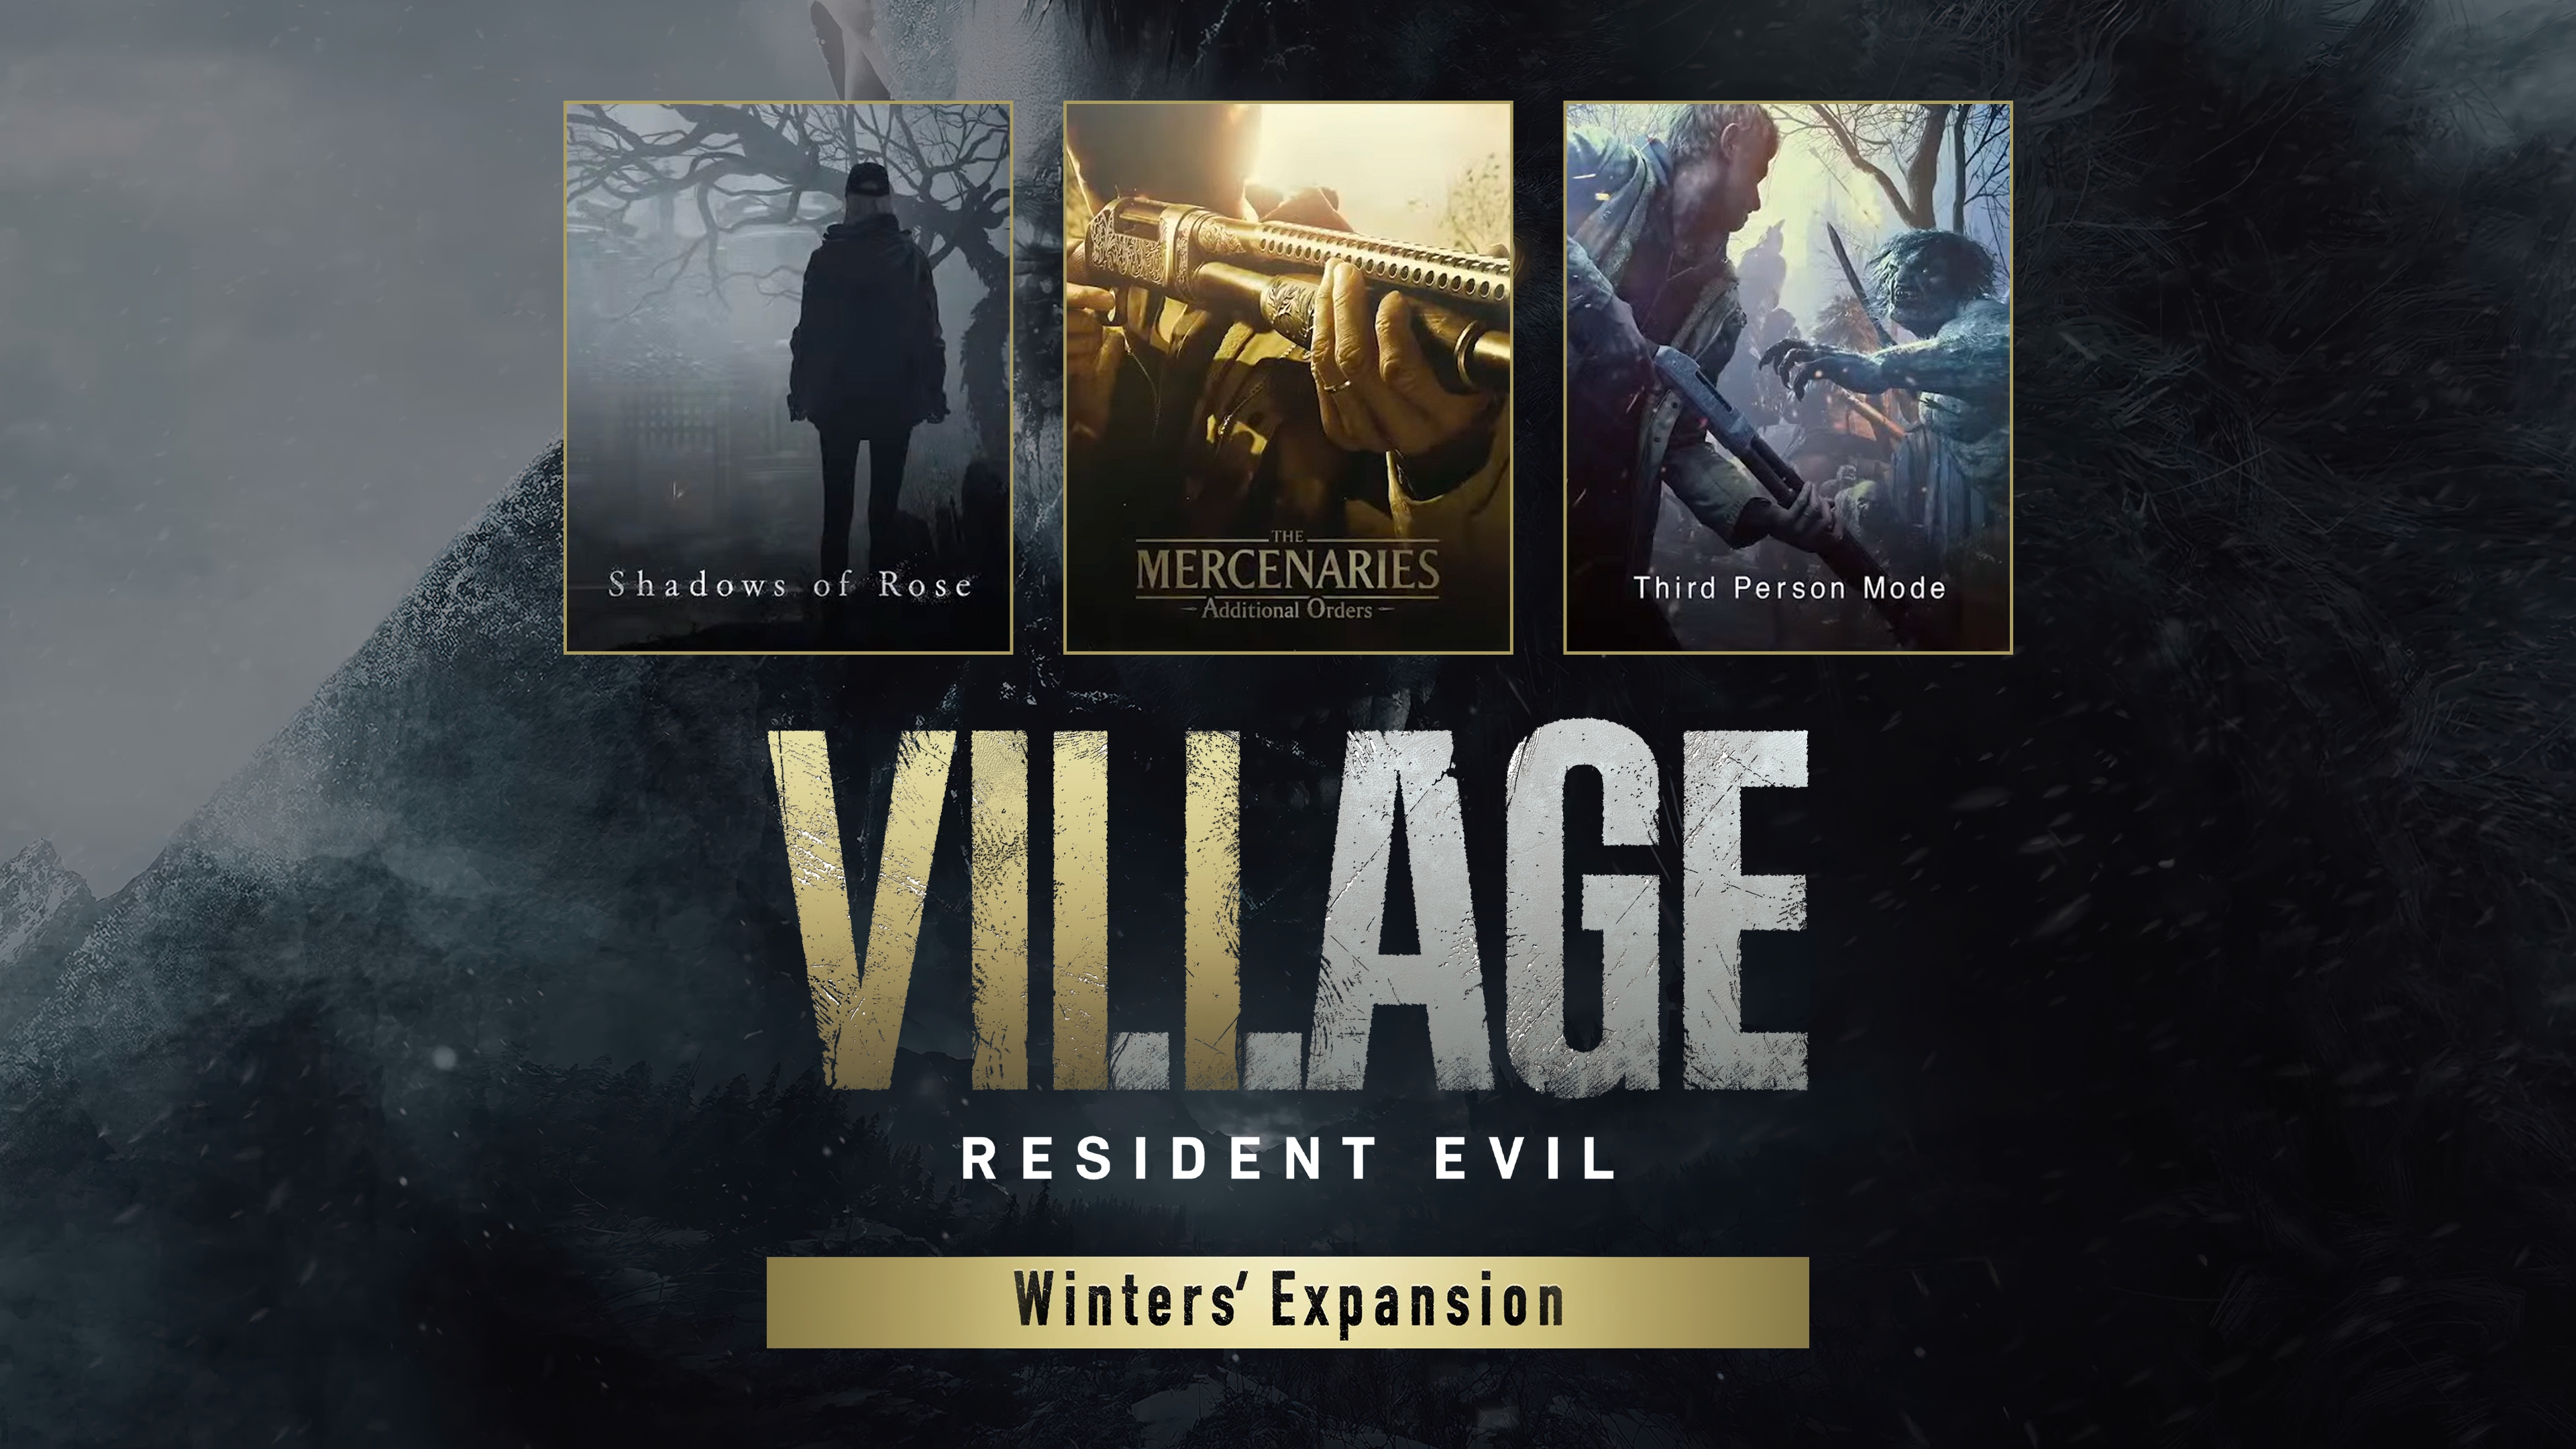 Resident Evil Village Available Now for Xbox One and Xbox Series X